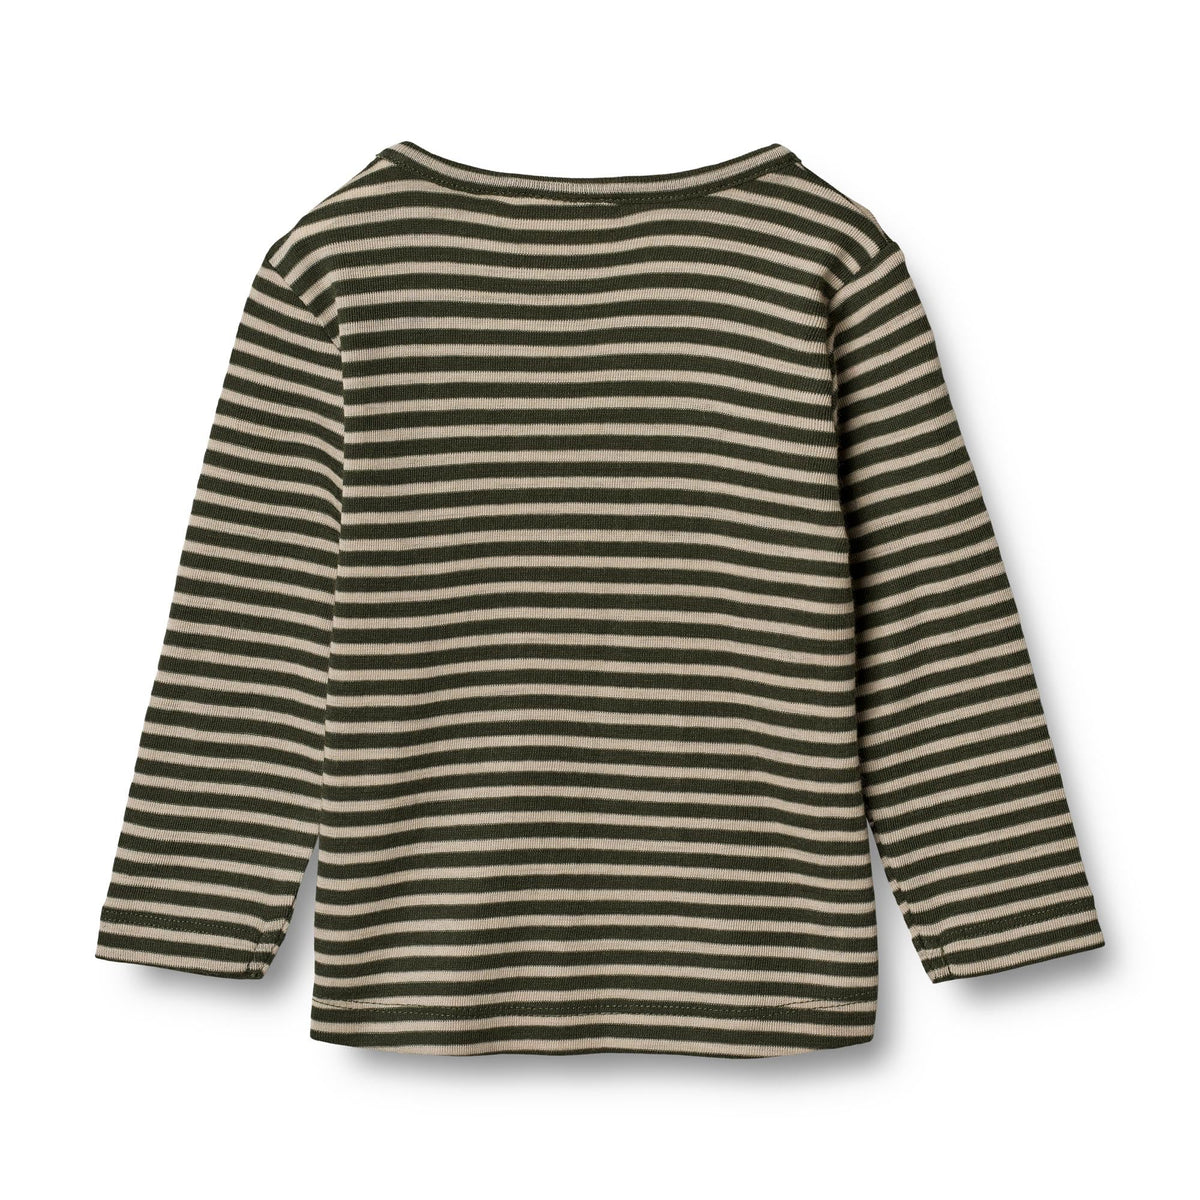 T-Shirt Wheat of Wool Wool range LS an incredible have We